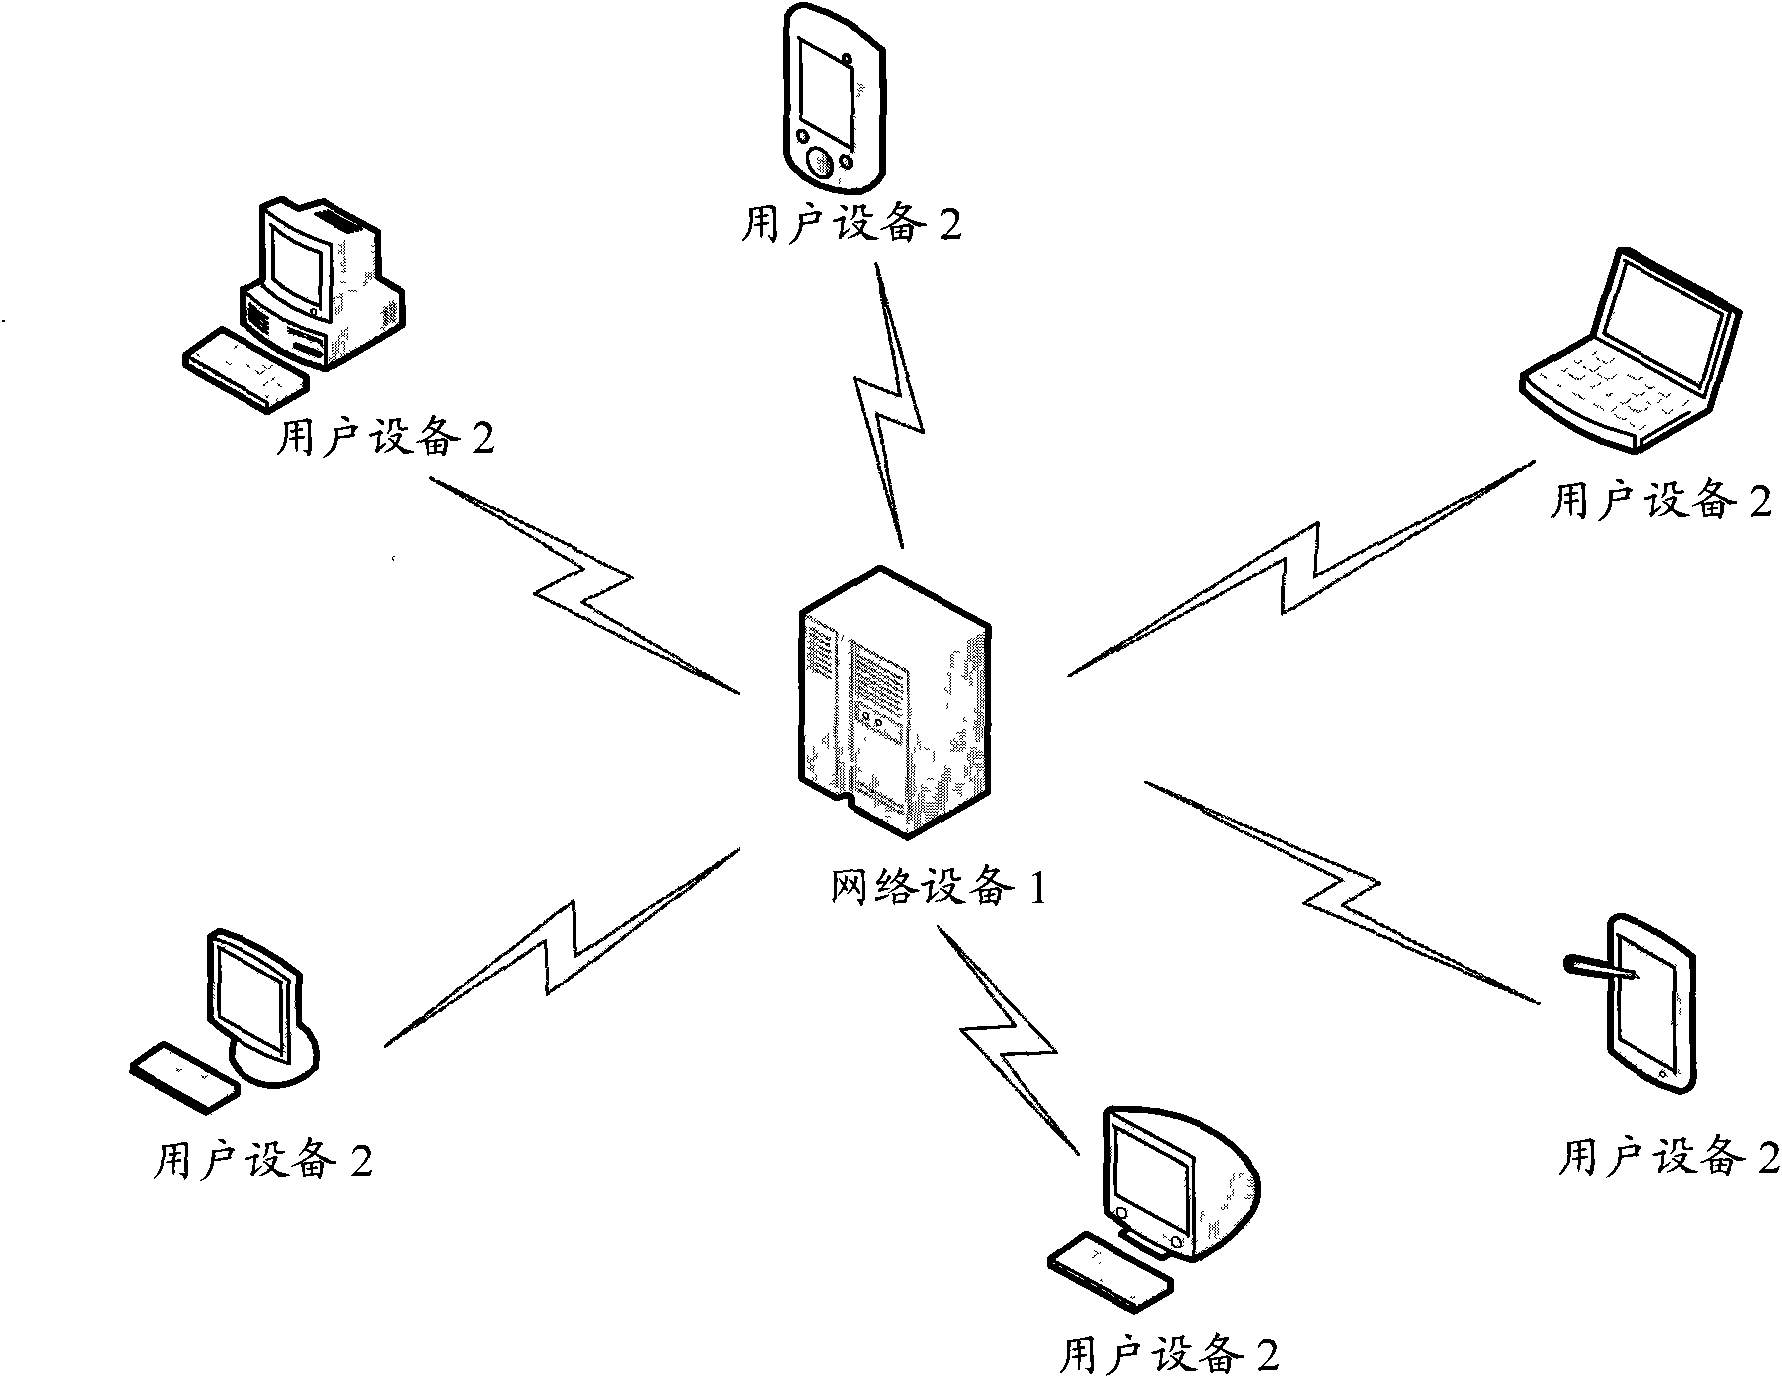 Method and equipment used for providing second search result based on real-time search